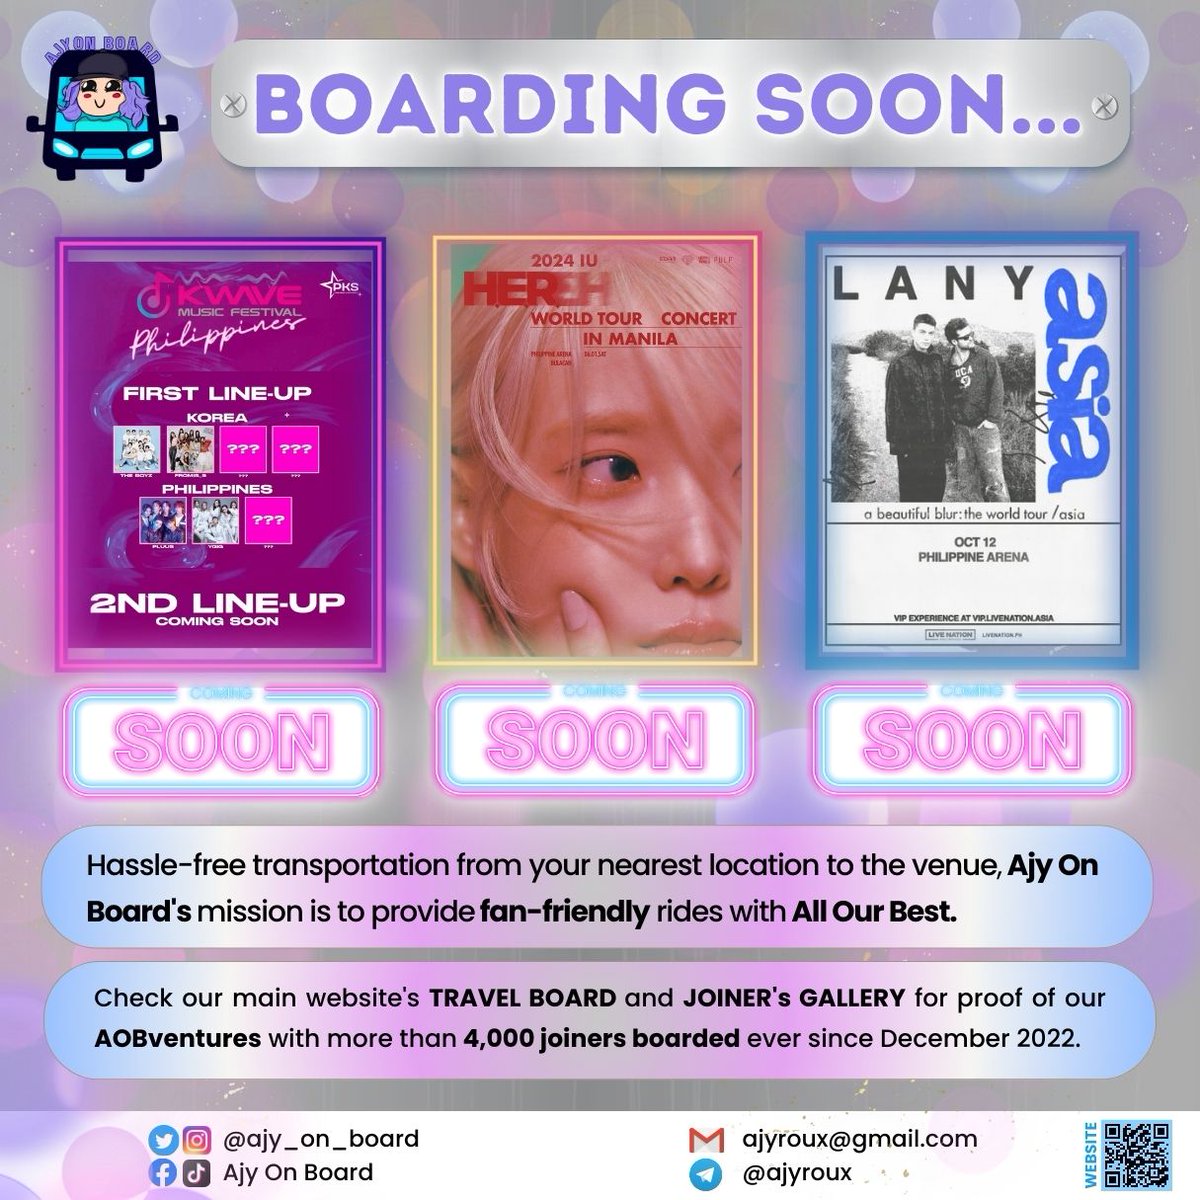 AJY is already excited for the AOBVENTURES of 2024!🚐 Initial details for AOB's BOARDING SOON transpo events have been curated and REGISTRATION PERIOD has been scheduled.📰 Shall I see you aboard?🫡 #AjyOnBoard #HER_World_Tour #LANYabeautifulblurPH #KWAVEPH